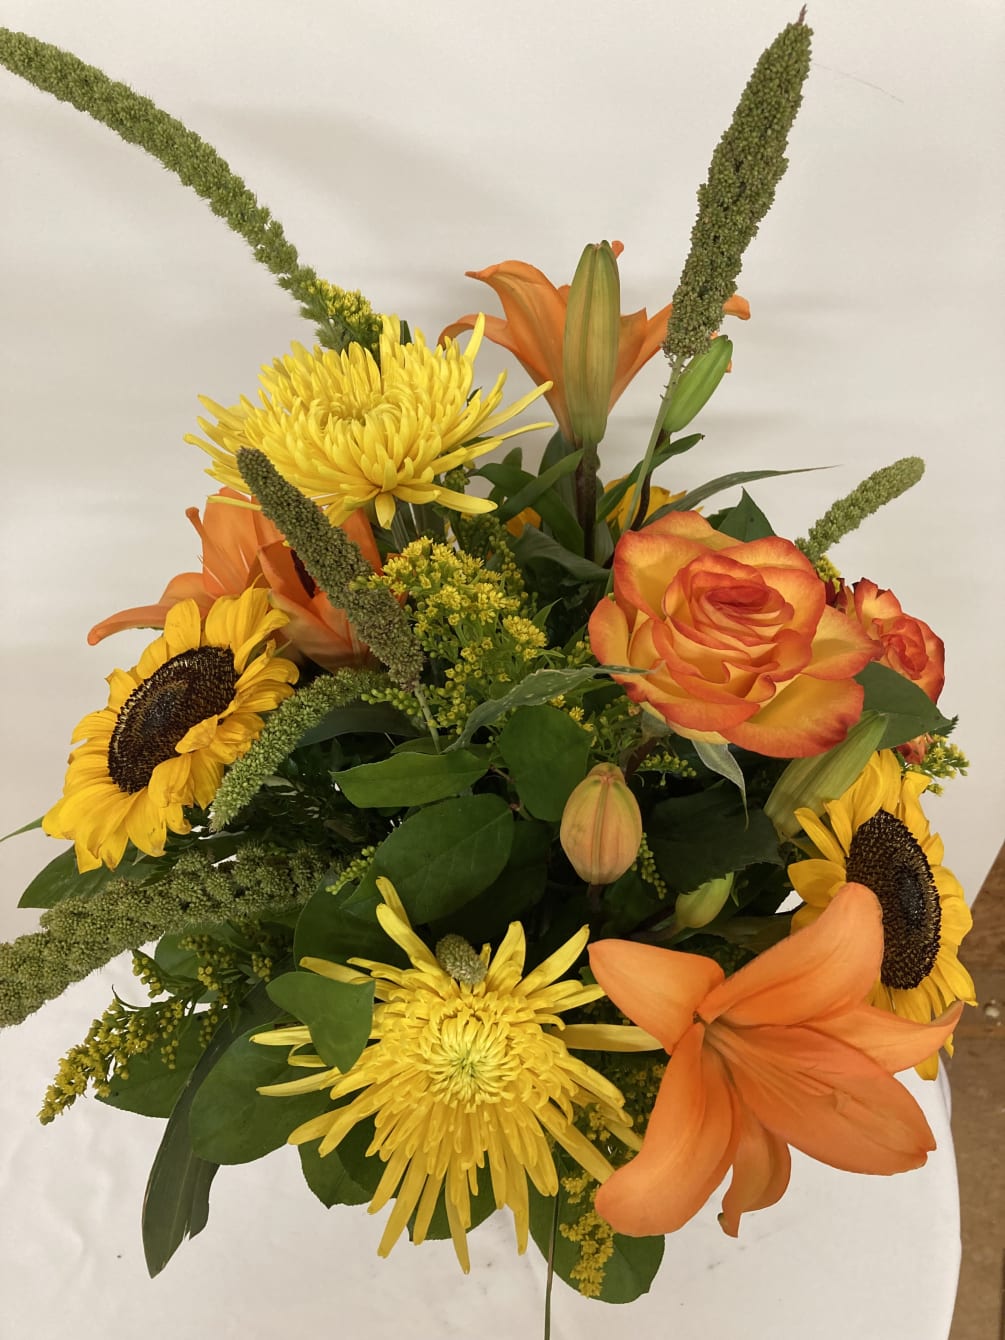 Orange  lilies and roses with yellow sunfowers and spider mums surrounded